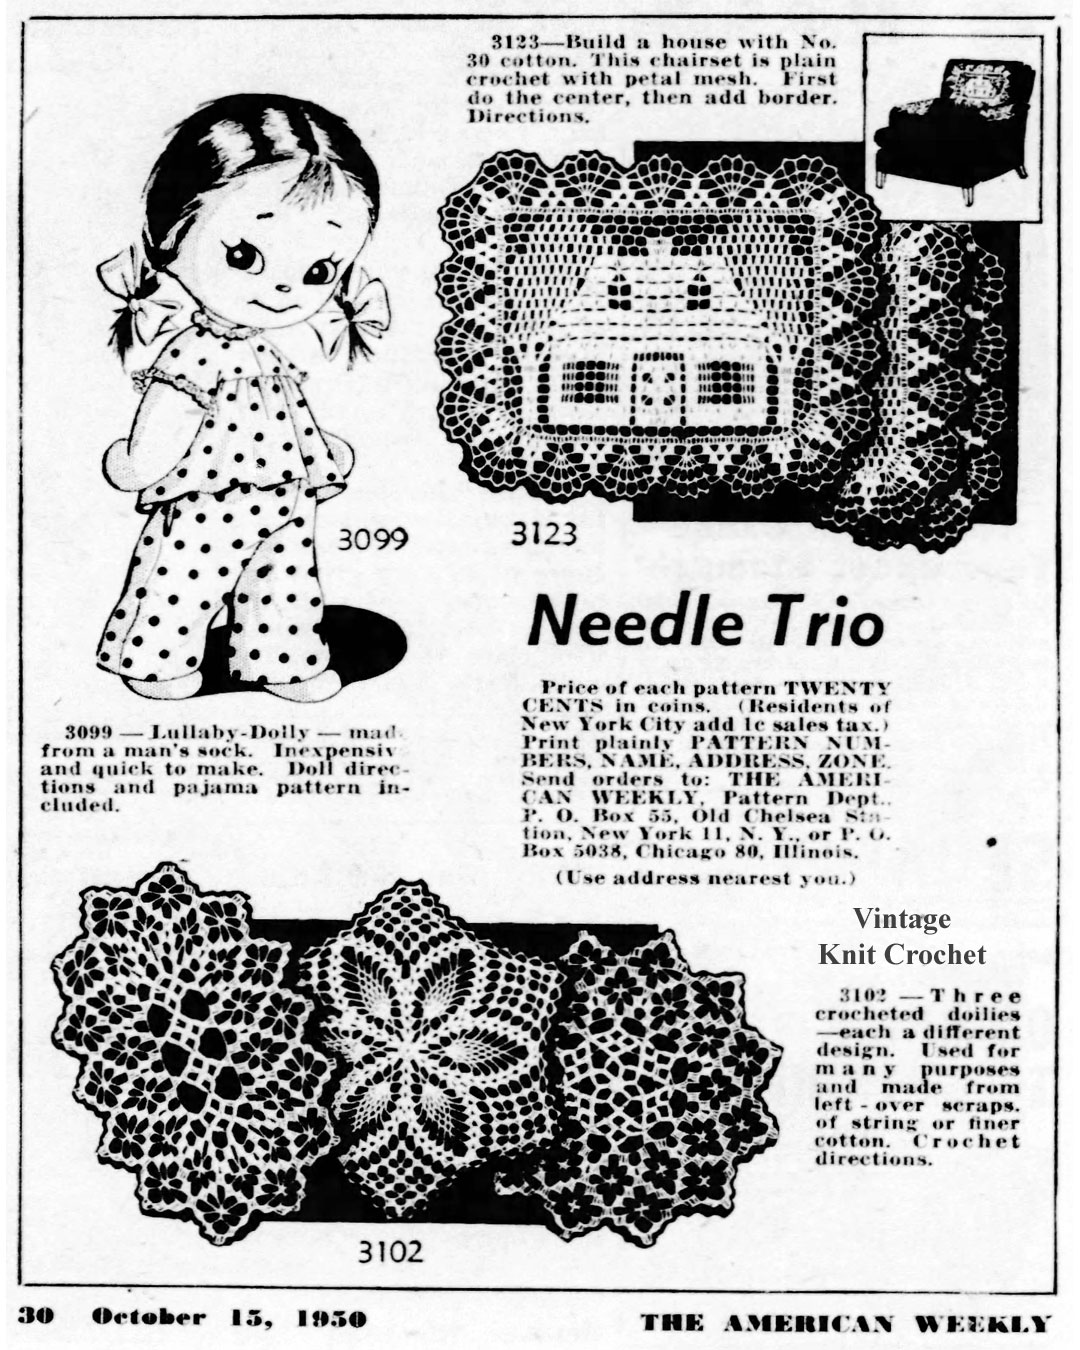 Mail Order No 3102 Crocheted Doilies Newspaper Advertisement 